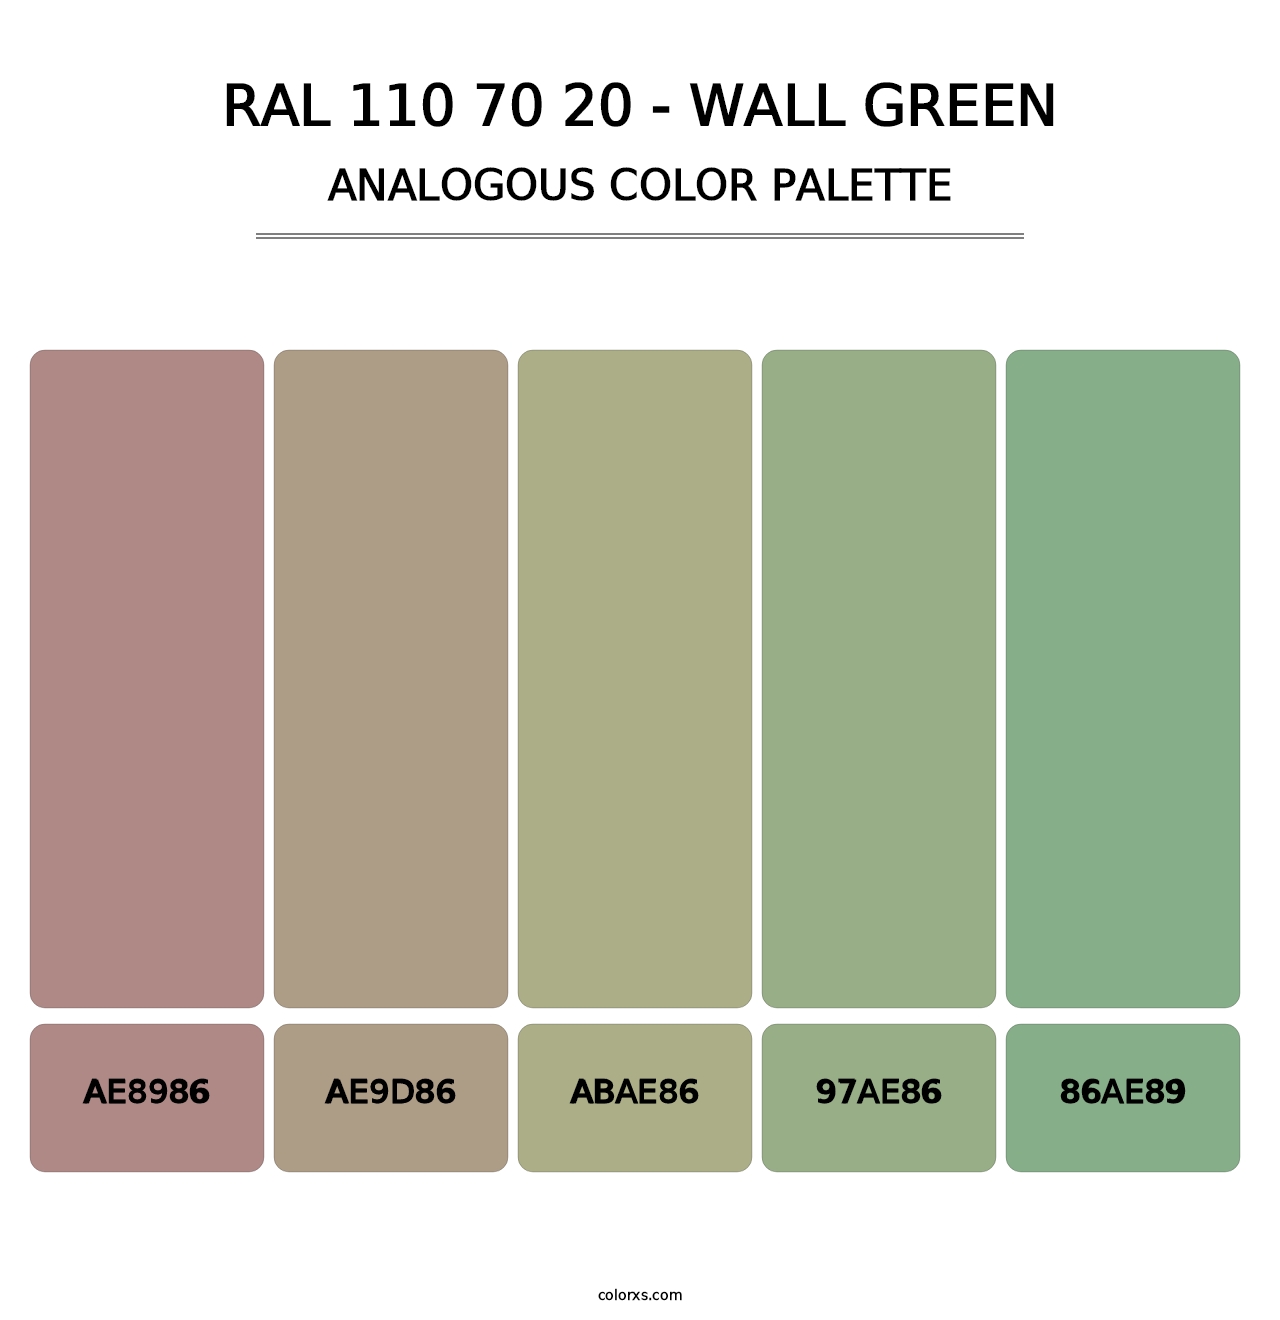 RAL 110 70 20 - Wall Green - Analogous Color Palette